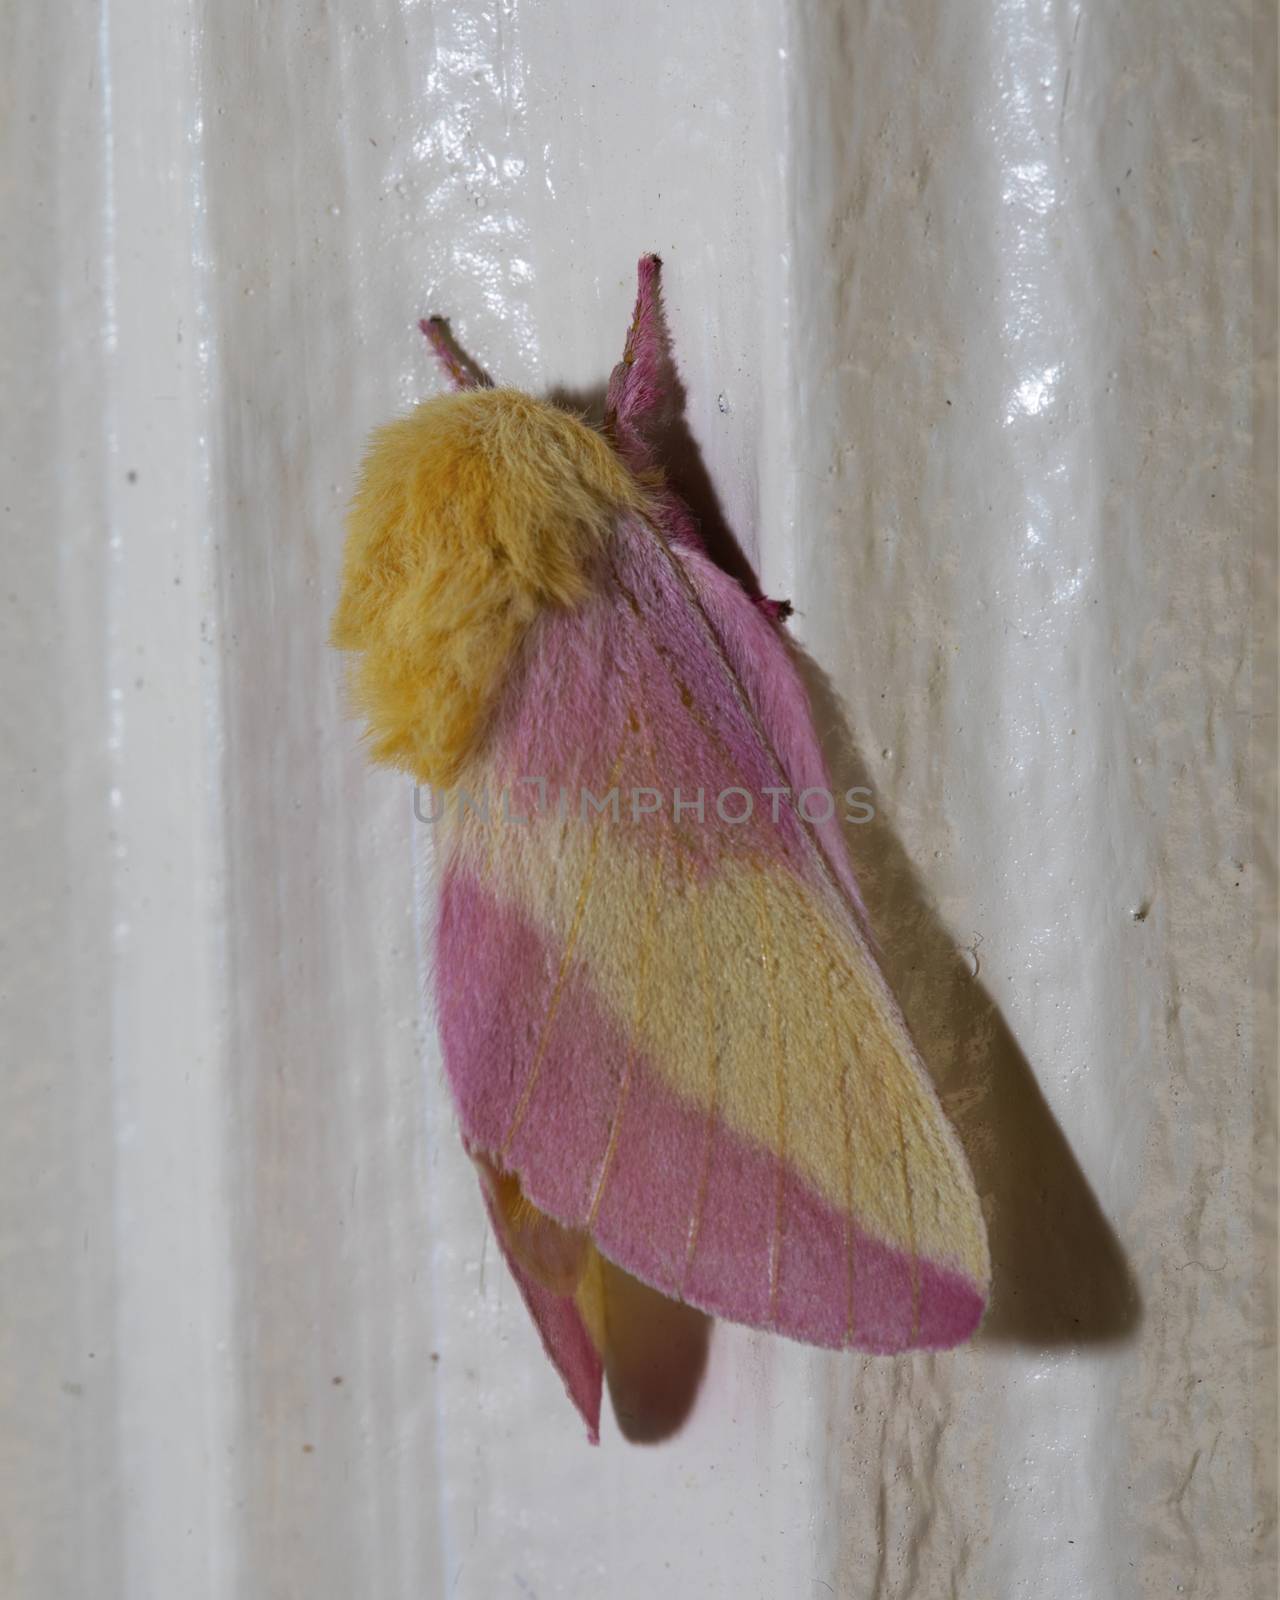 Rosy Maple Moth on Door Frame by CharlieFloyd